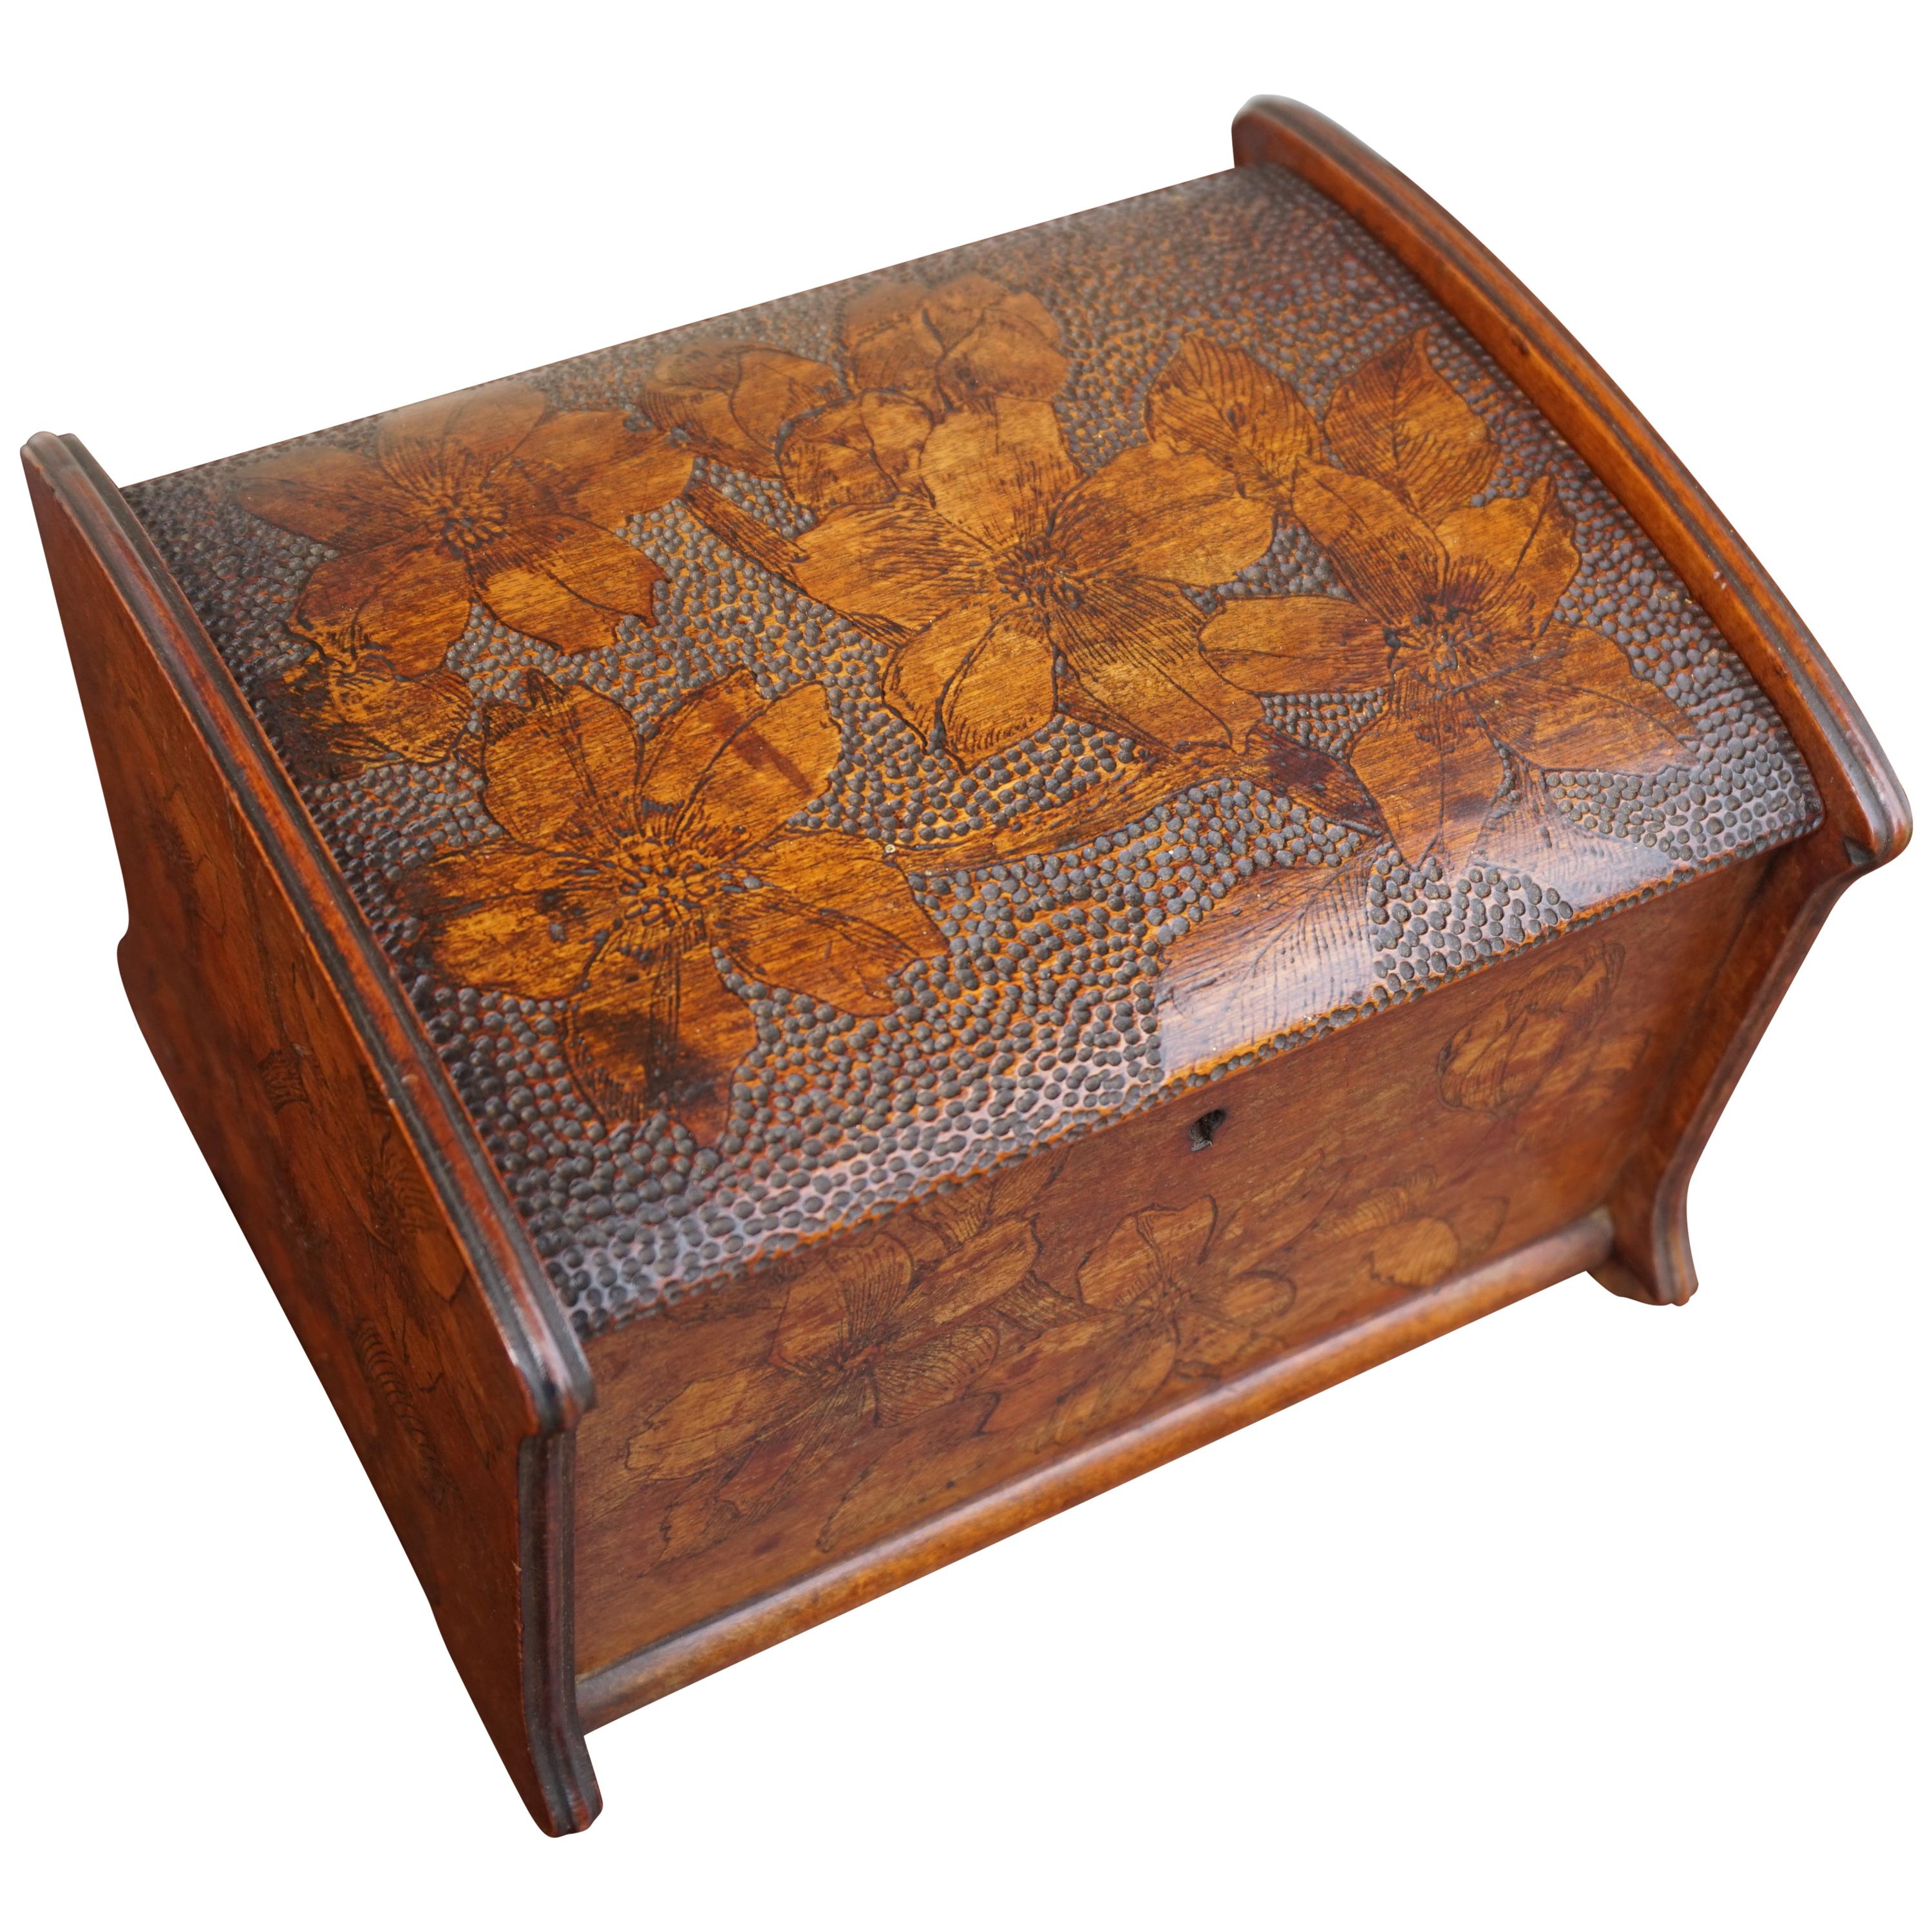 Stunning Arts & Crafts Box with Finest Hand Carved Flower Patterns in Bas Relief